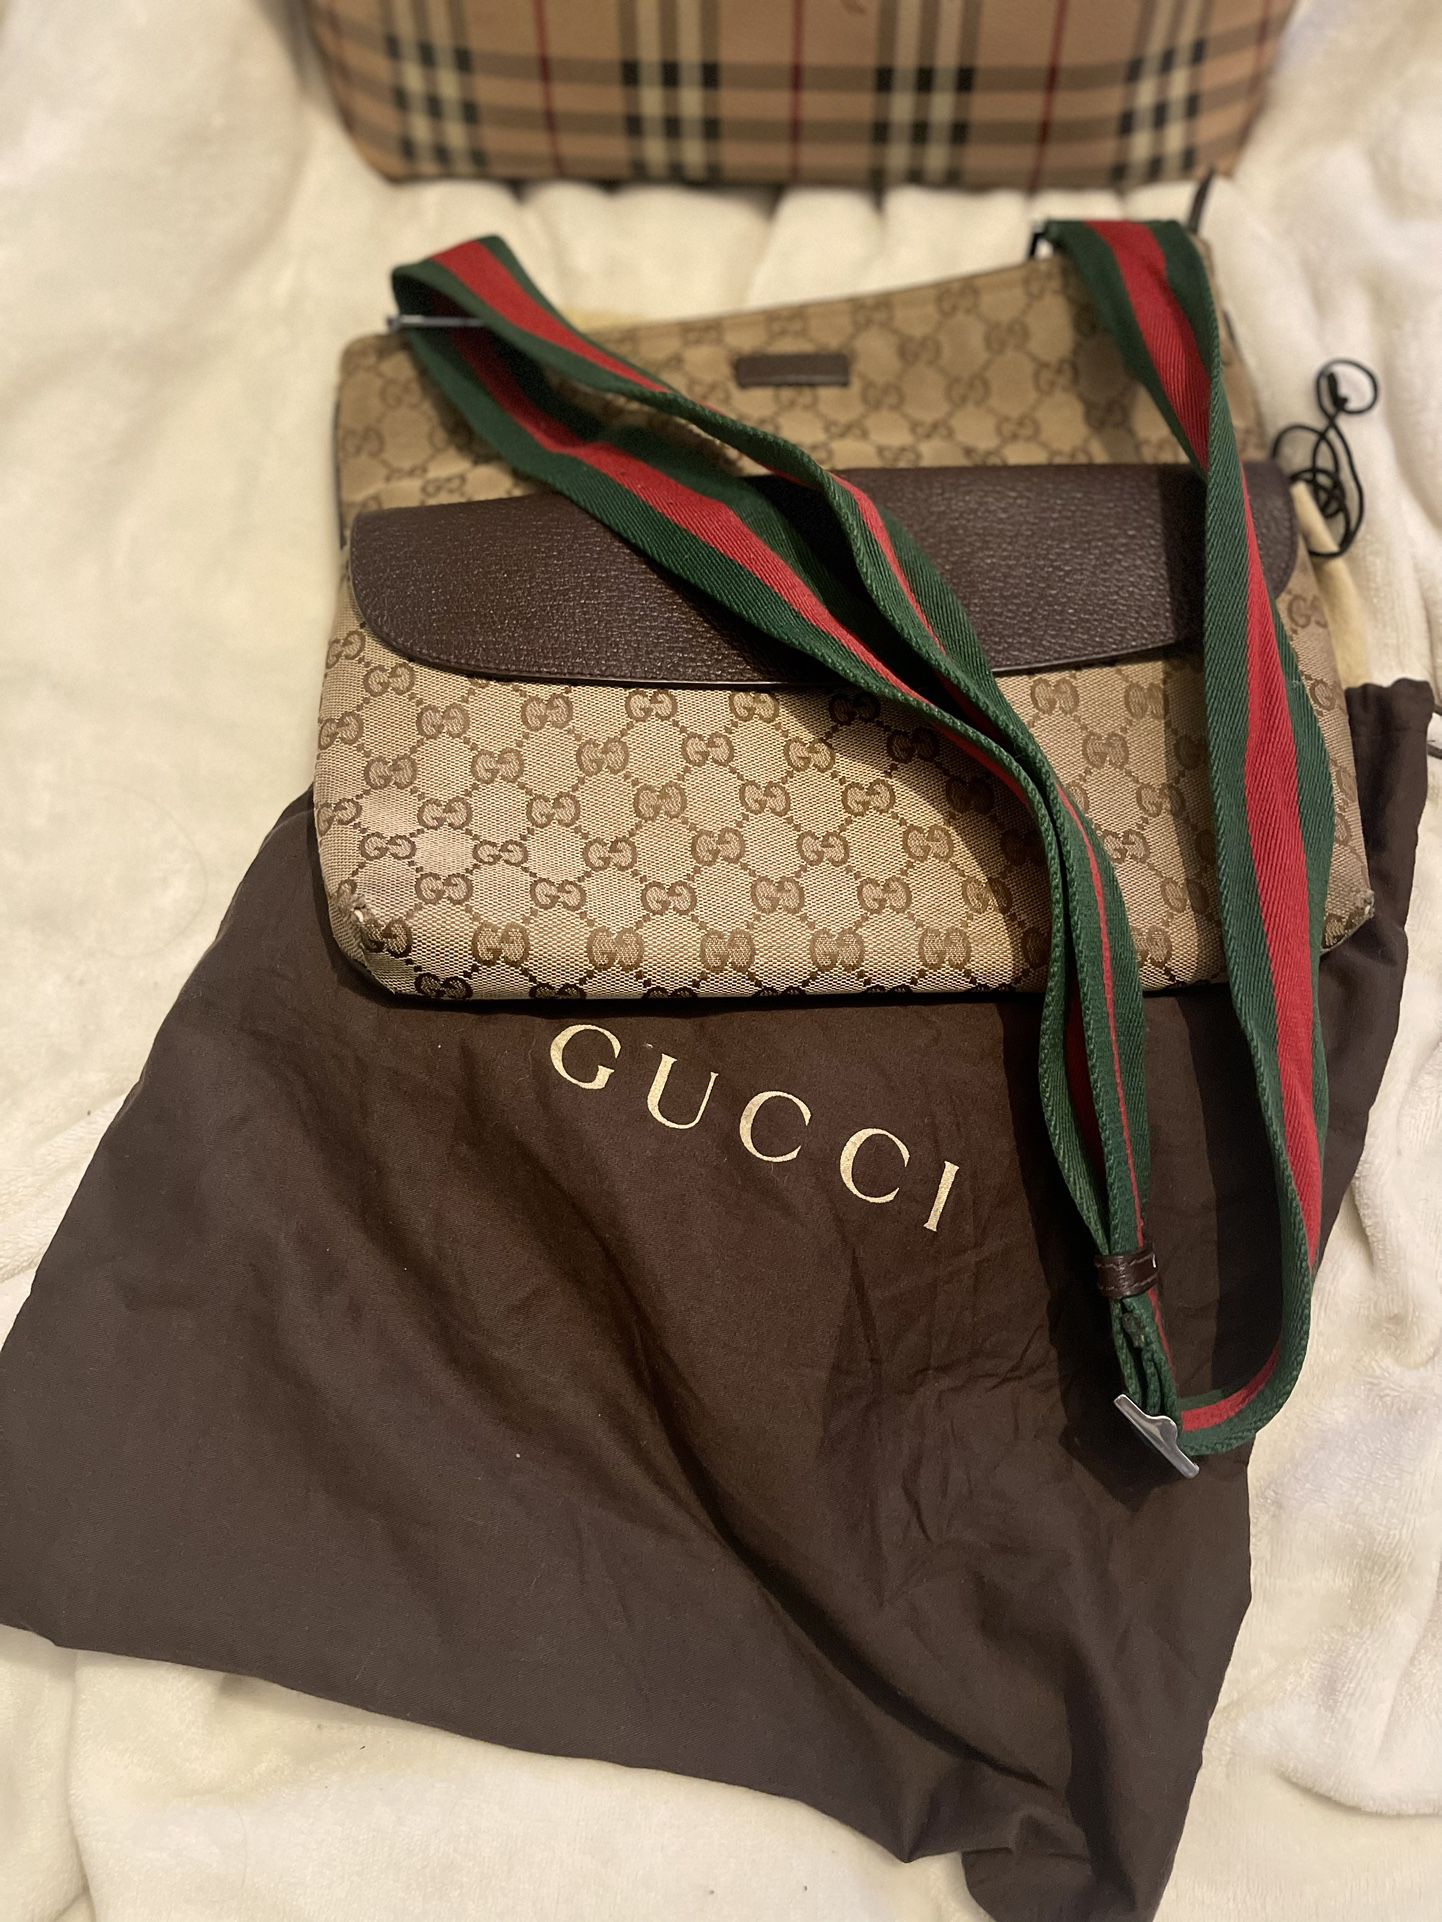 Gucci Beige/Brown Leather Crossbody Bag